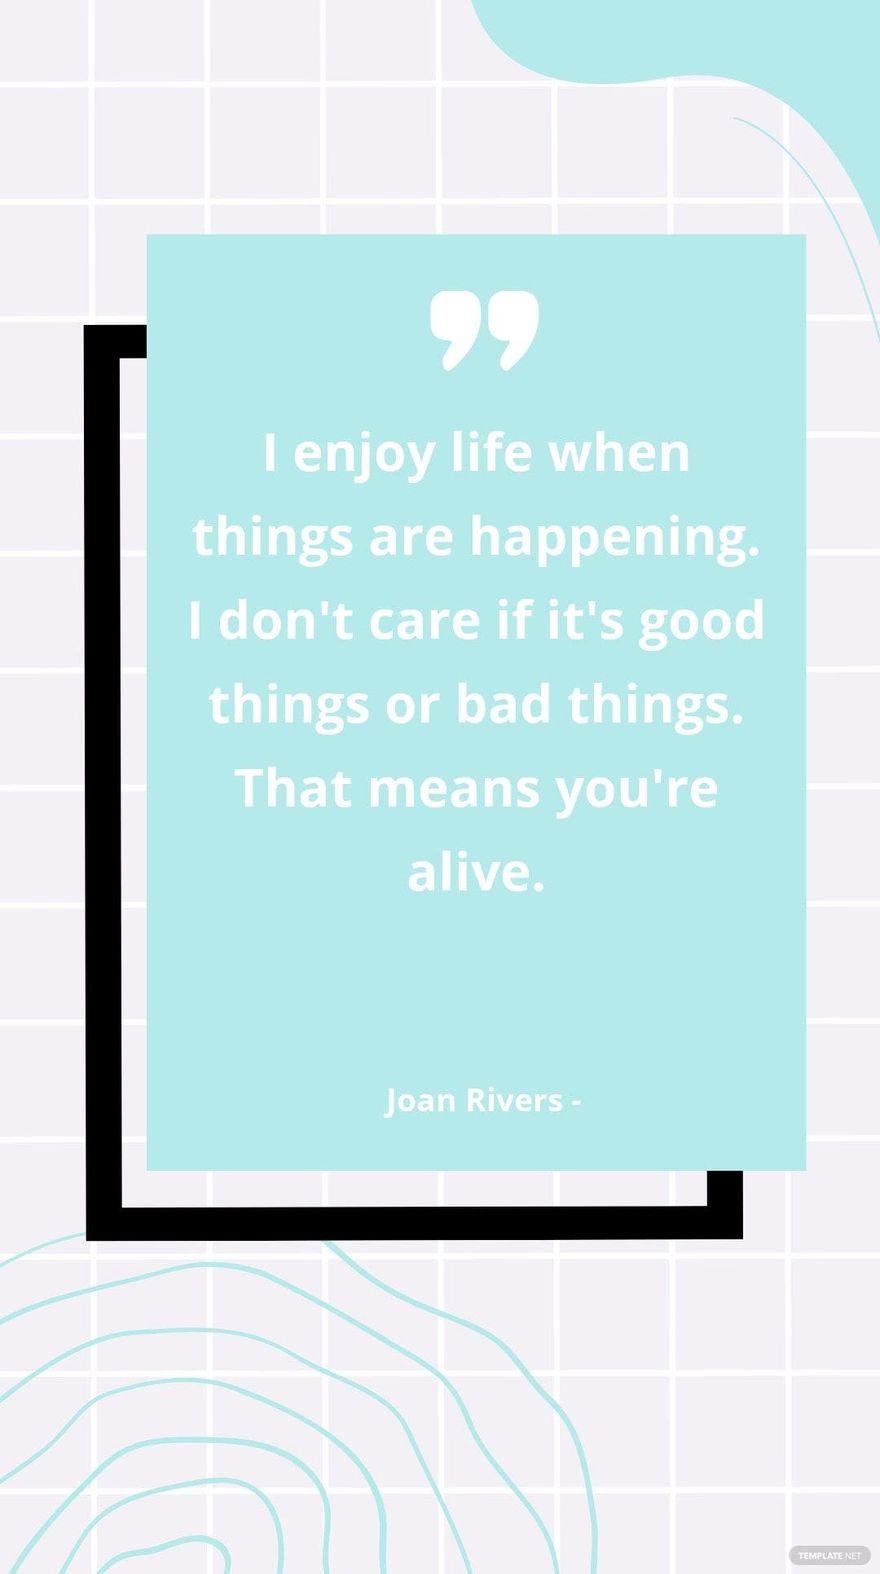 Joan Rivers - I enjoy life when things are happening. I don't care if it's good things or bad things. That means you're alive.